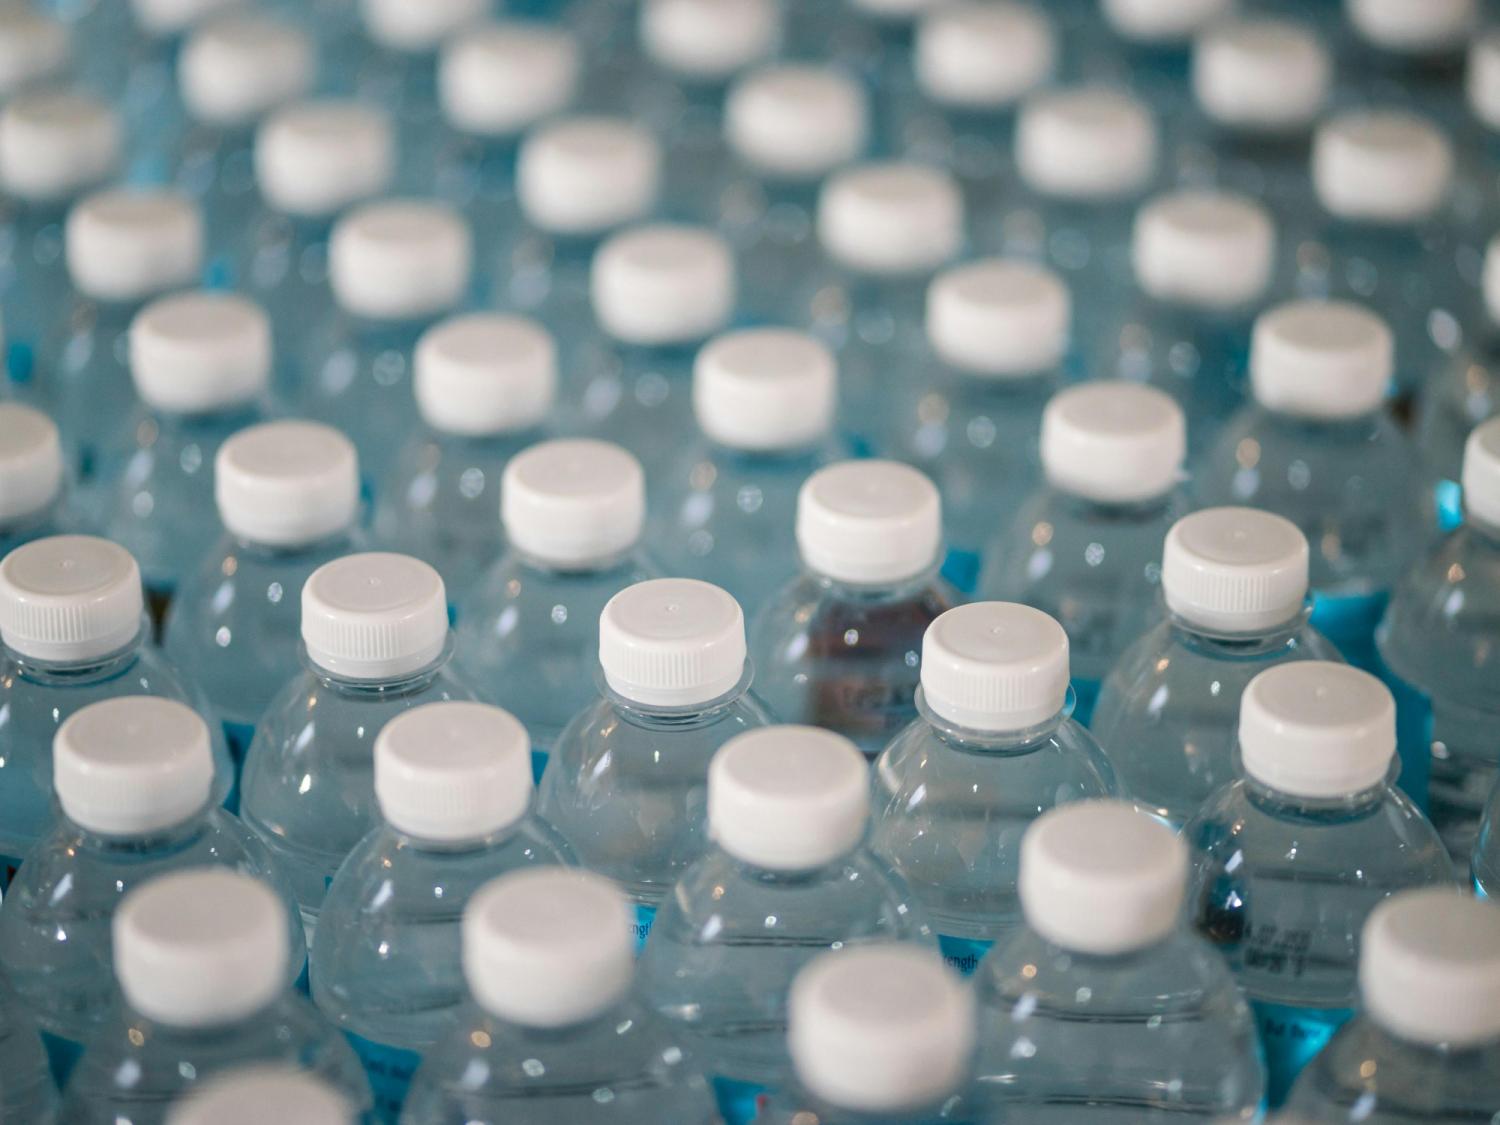 A jury in Nevada has granted $130 million to five individuals who suffered liver damage as a result of consuming bottled water.